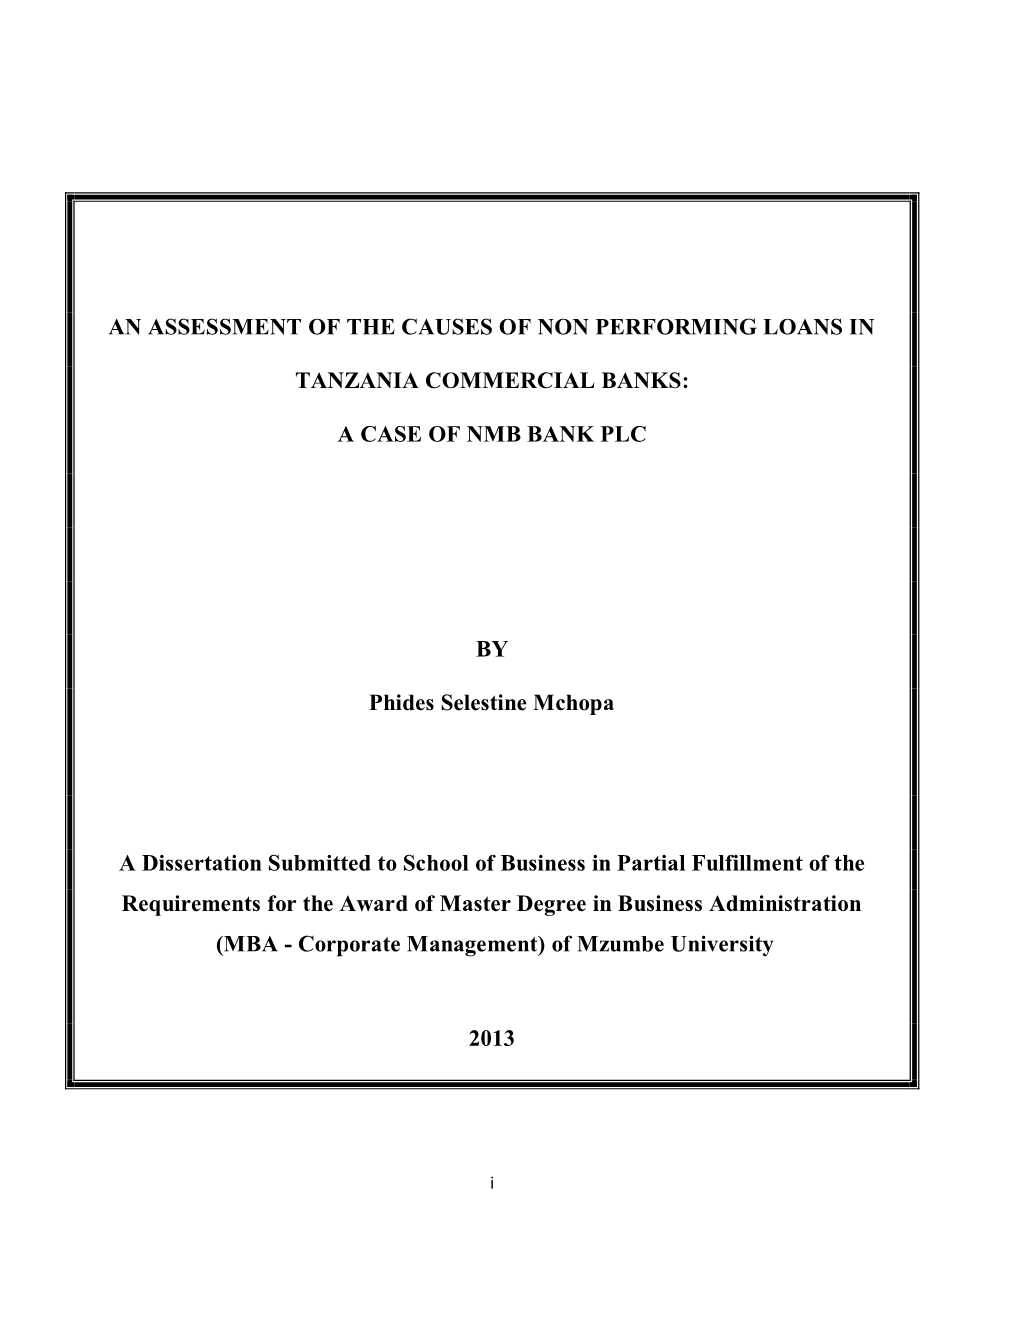 An Assessment of the Causes of Non Performing Loans In